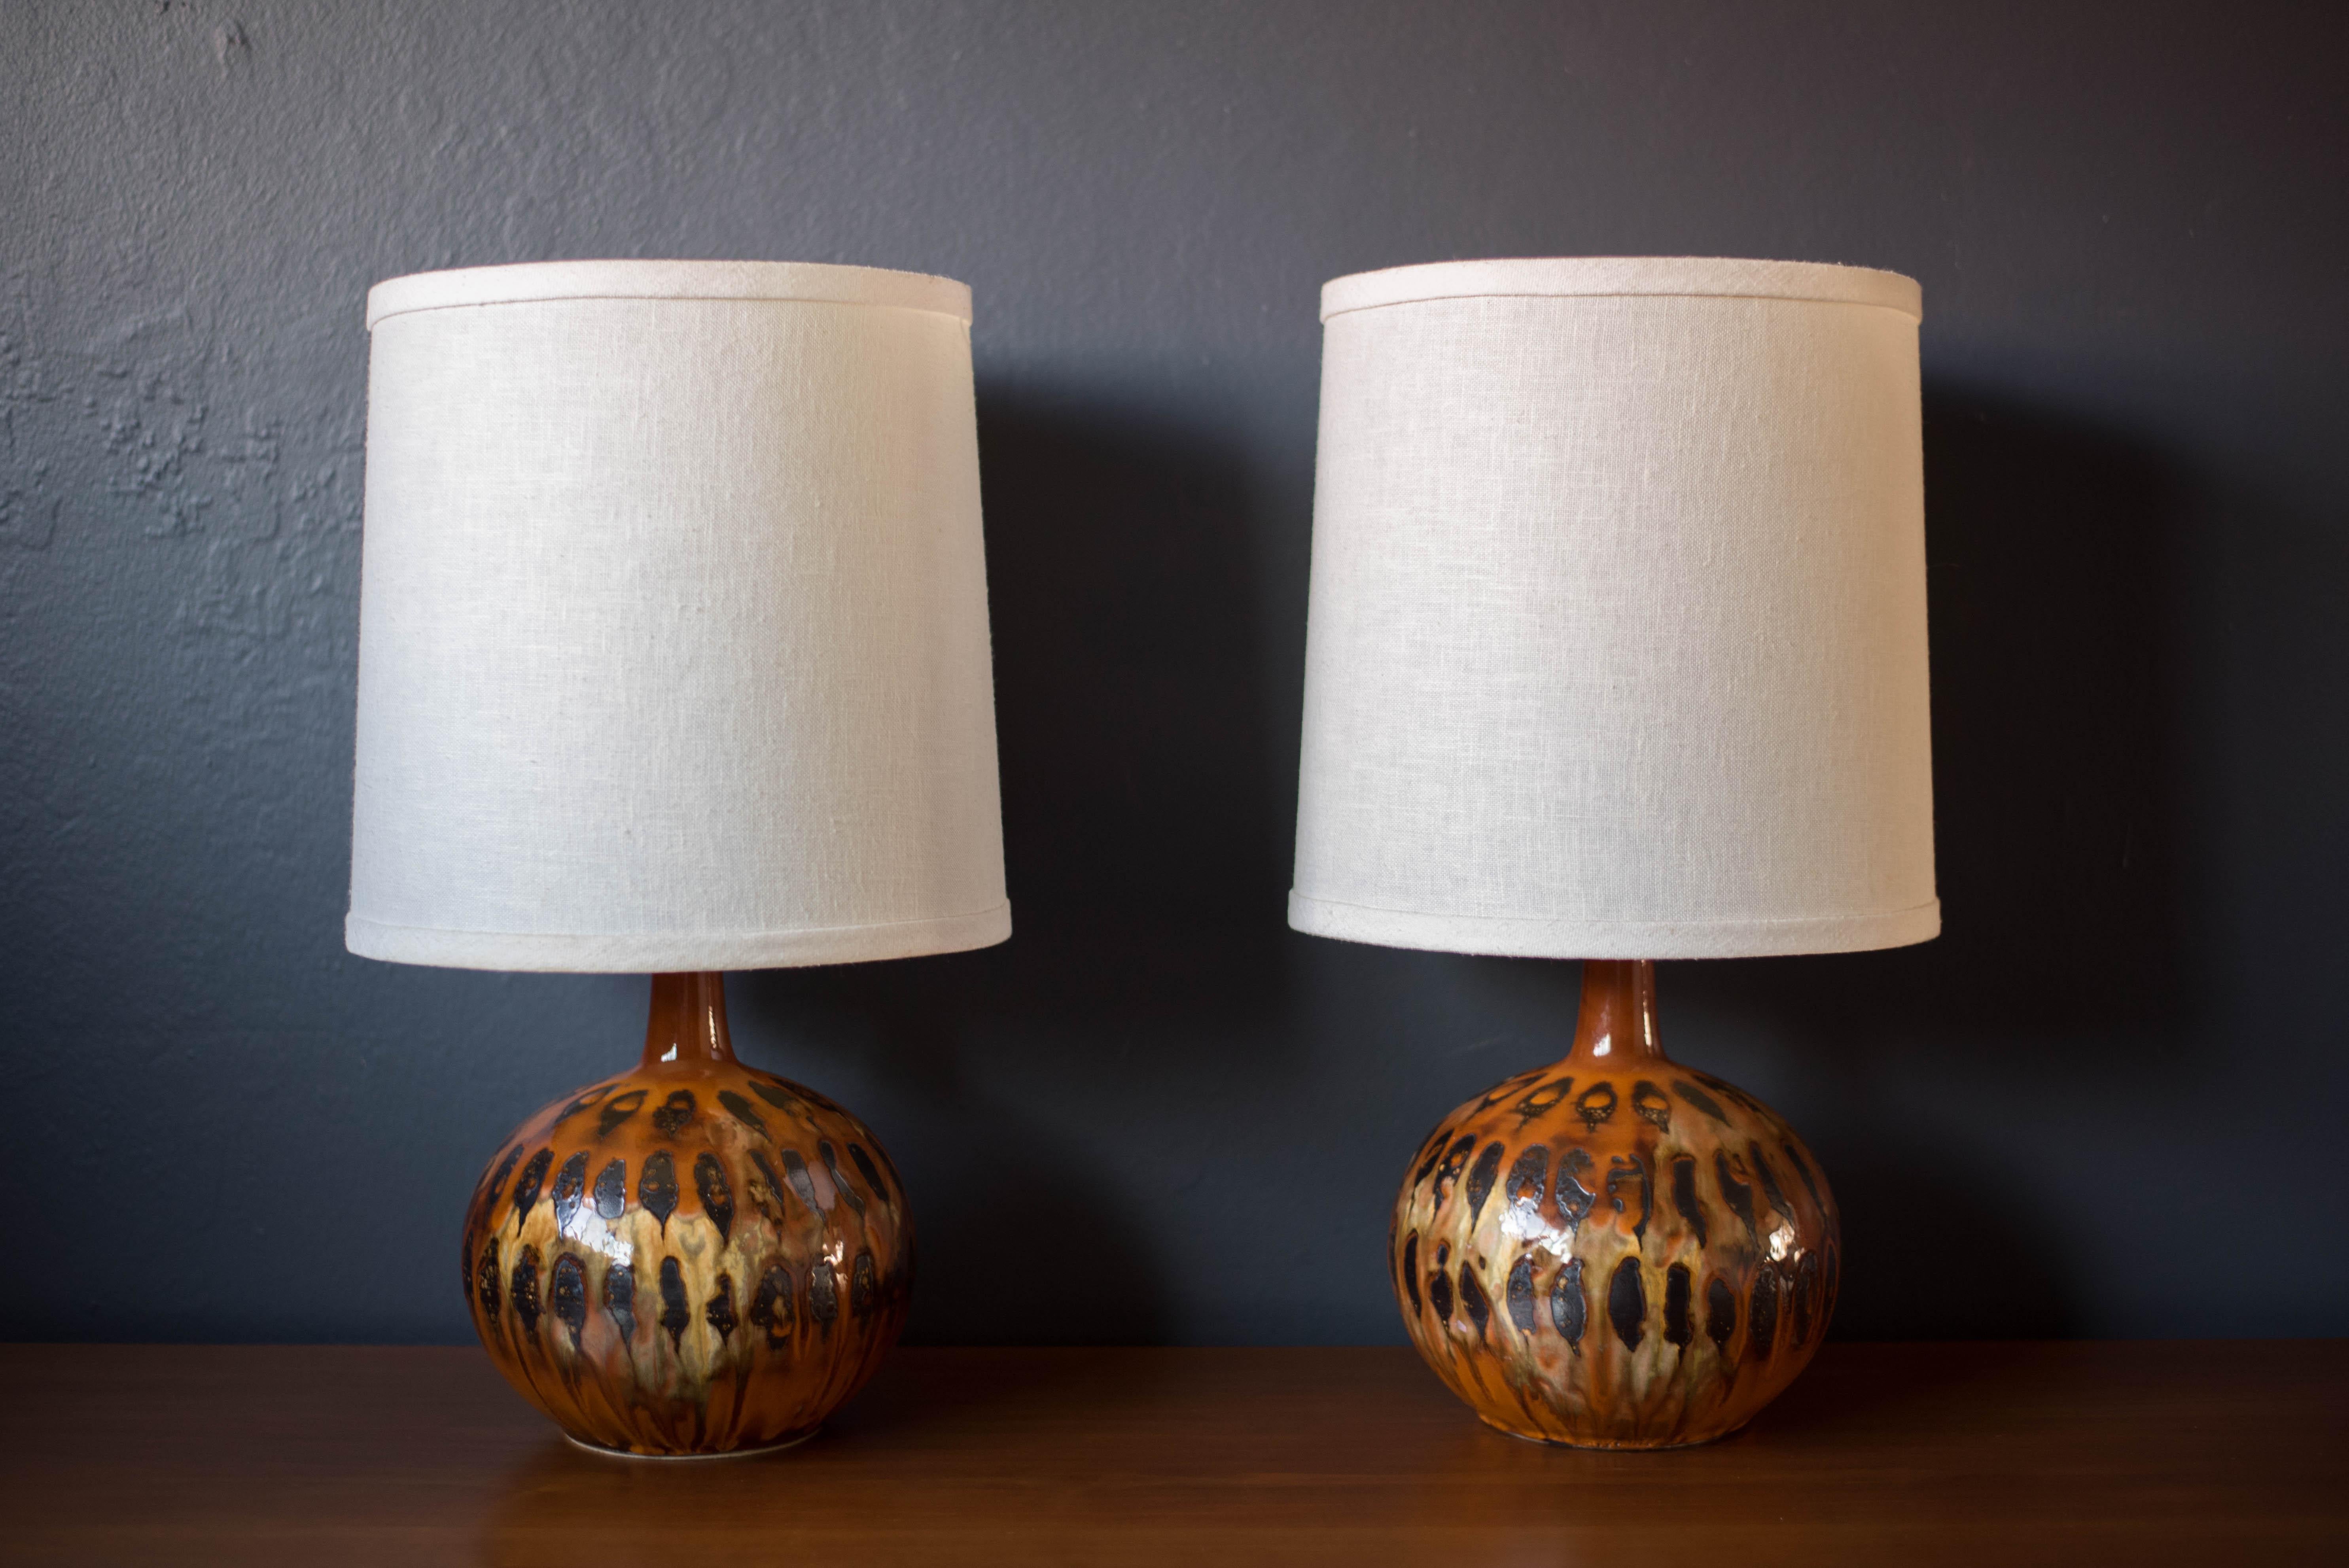 Vintage ceramic pottery lamps manufactured in the US. This set features a vibrant pattern of orange, neutral, and black tones in a drip glazed finish. Functions with a three way switch to emit a soft or brighter glow. Linen drum shades are